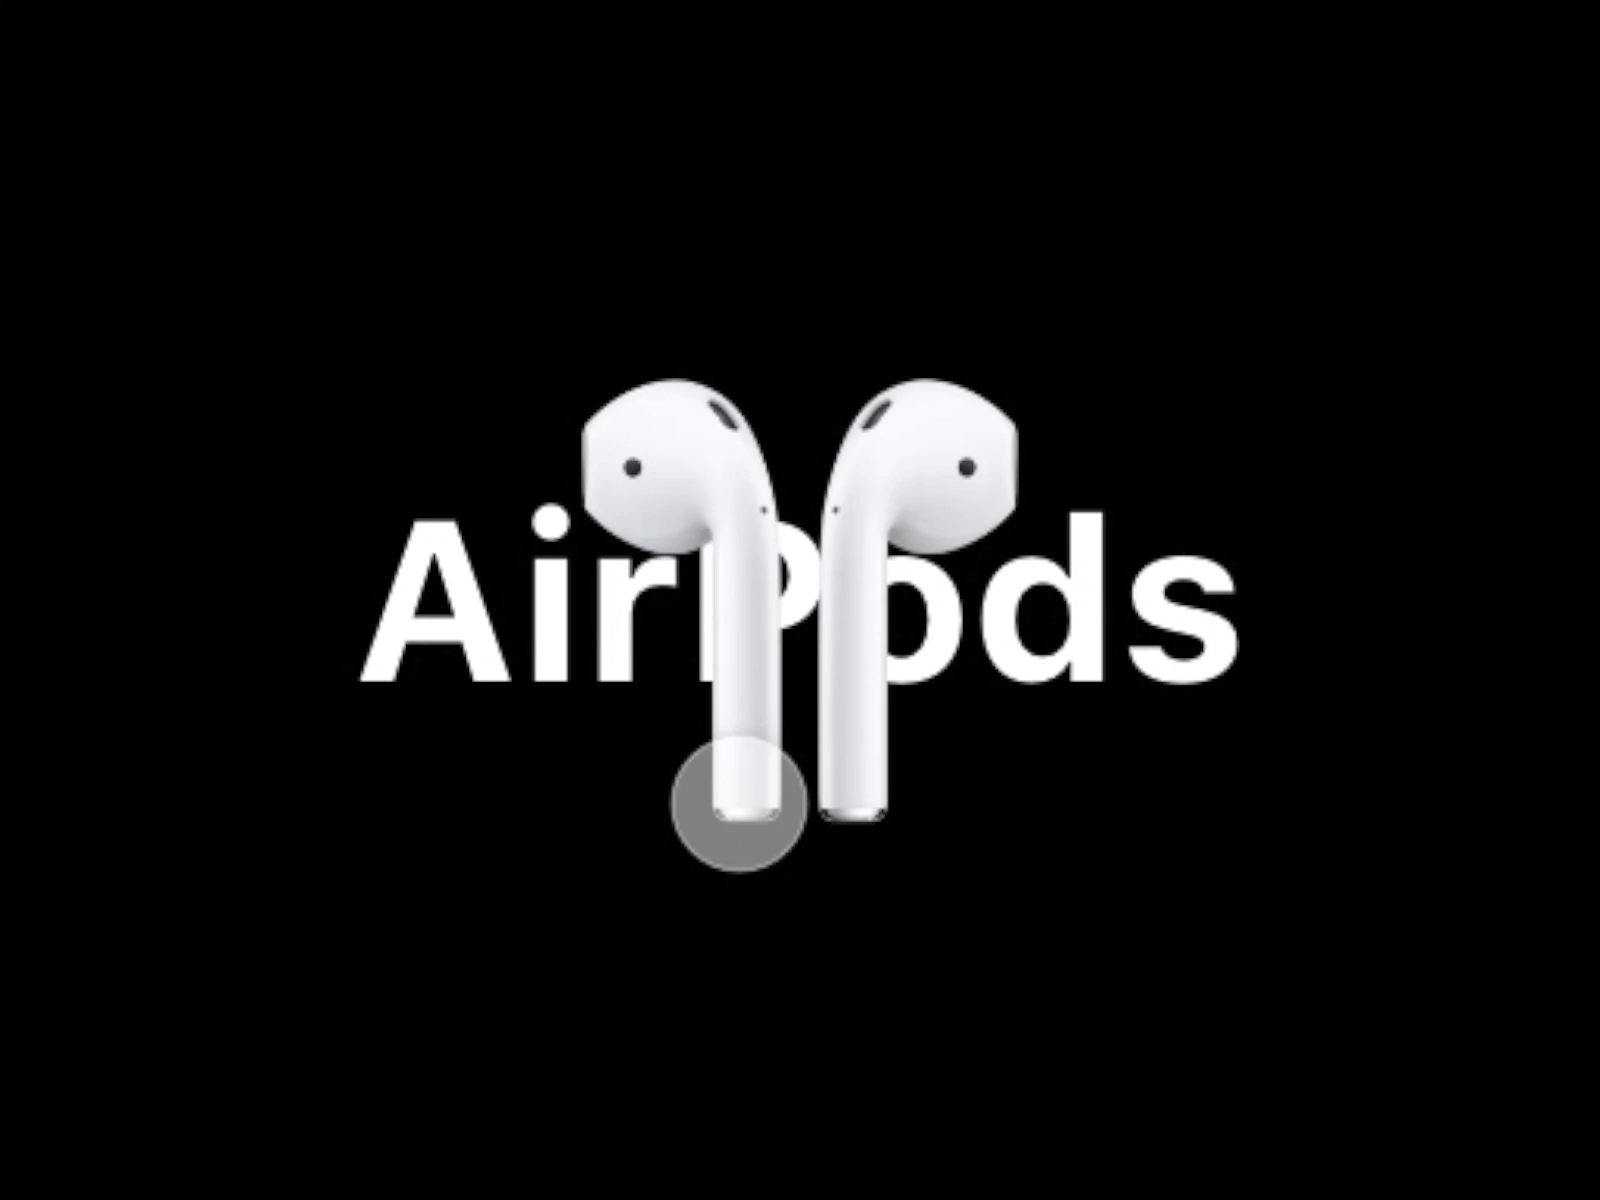 AirPods Smooth Animation | Adobe XD Anchor Links adobe xd airpod airpods anchor animation apple smooth animation xd animation xd design